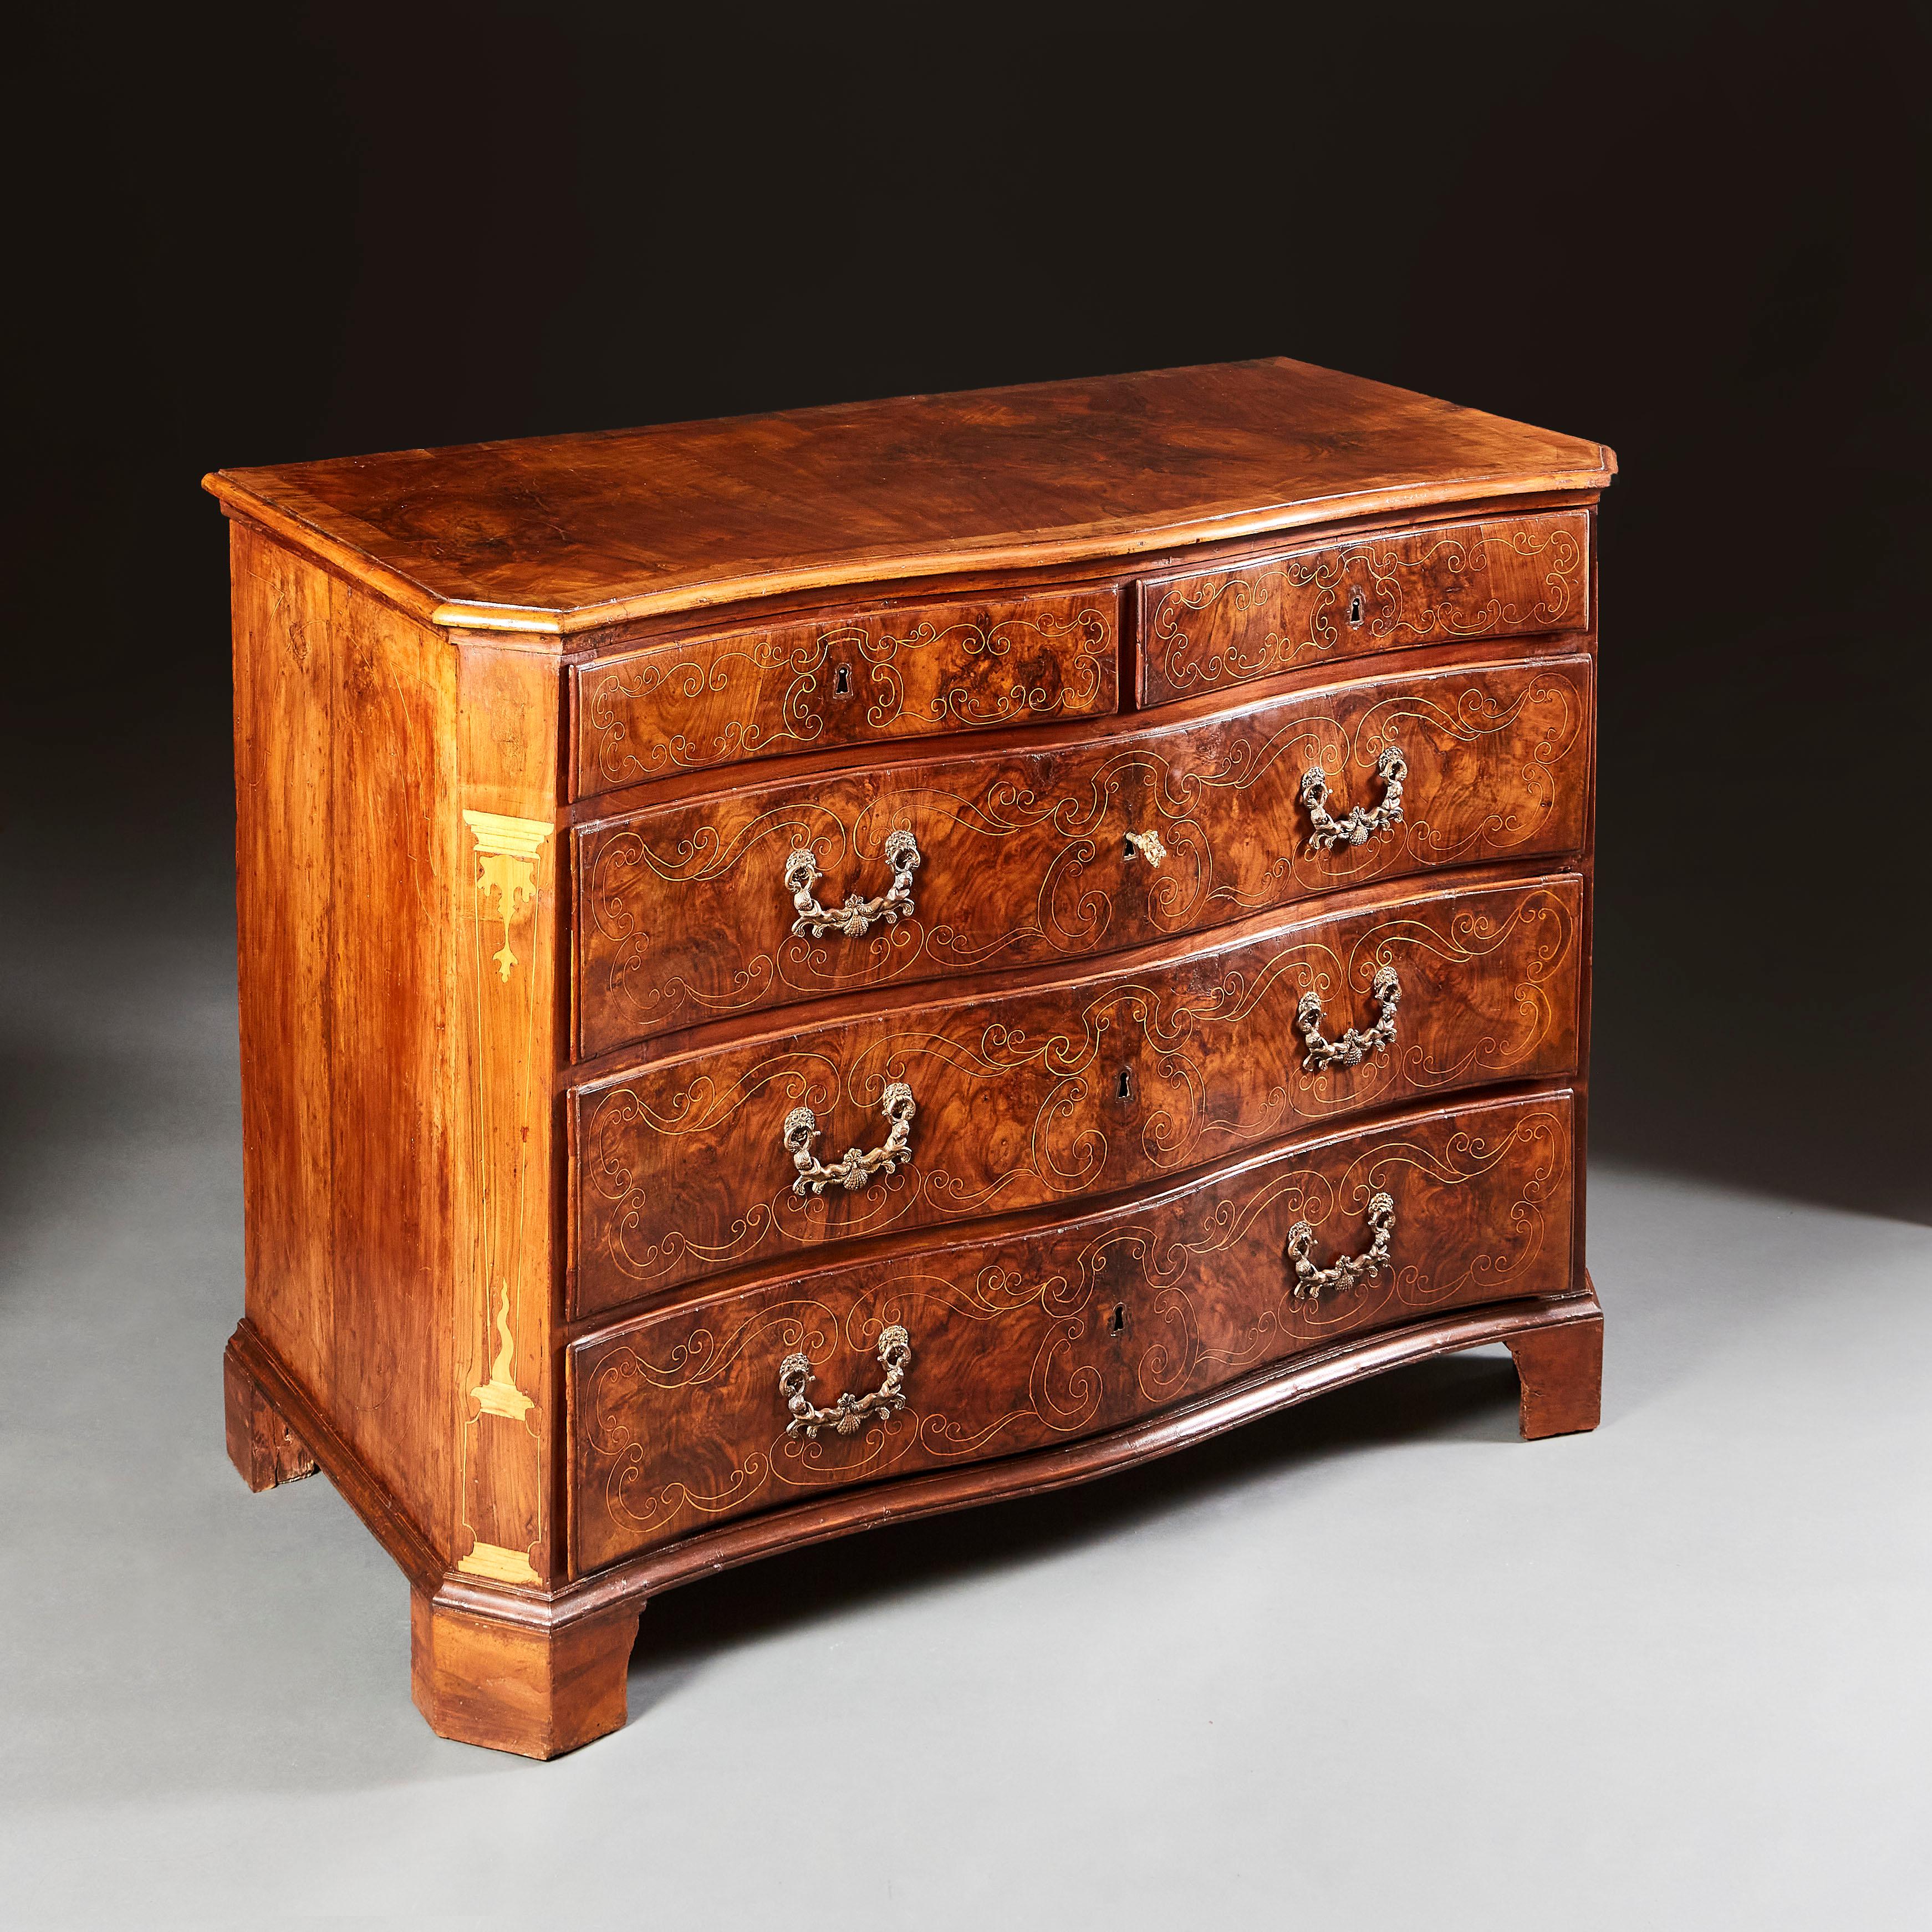 Italy, circa 1780

A fine late eighteenth century walnut serpentine commode, the drawer fronts decorated with fine box wood arabesques, handles of beaten bronze with scallop shells, quarter veneered top, all supported on bracket feet.

Height